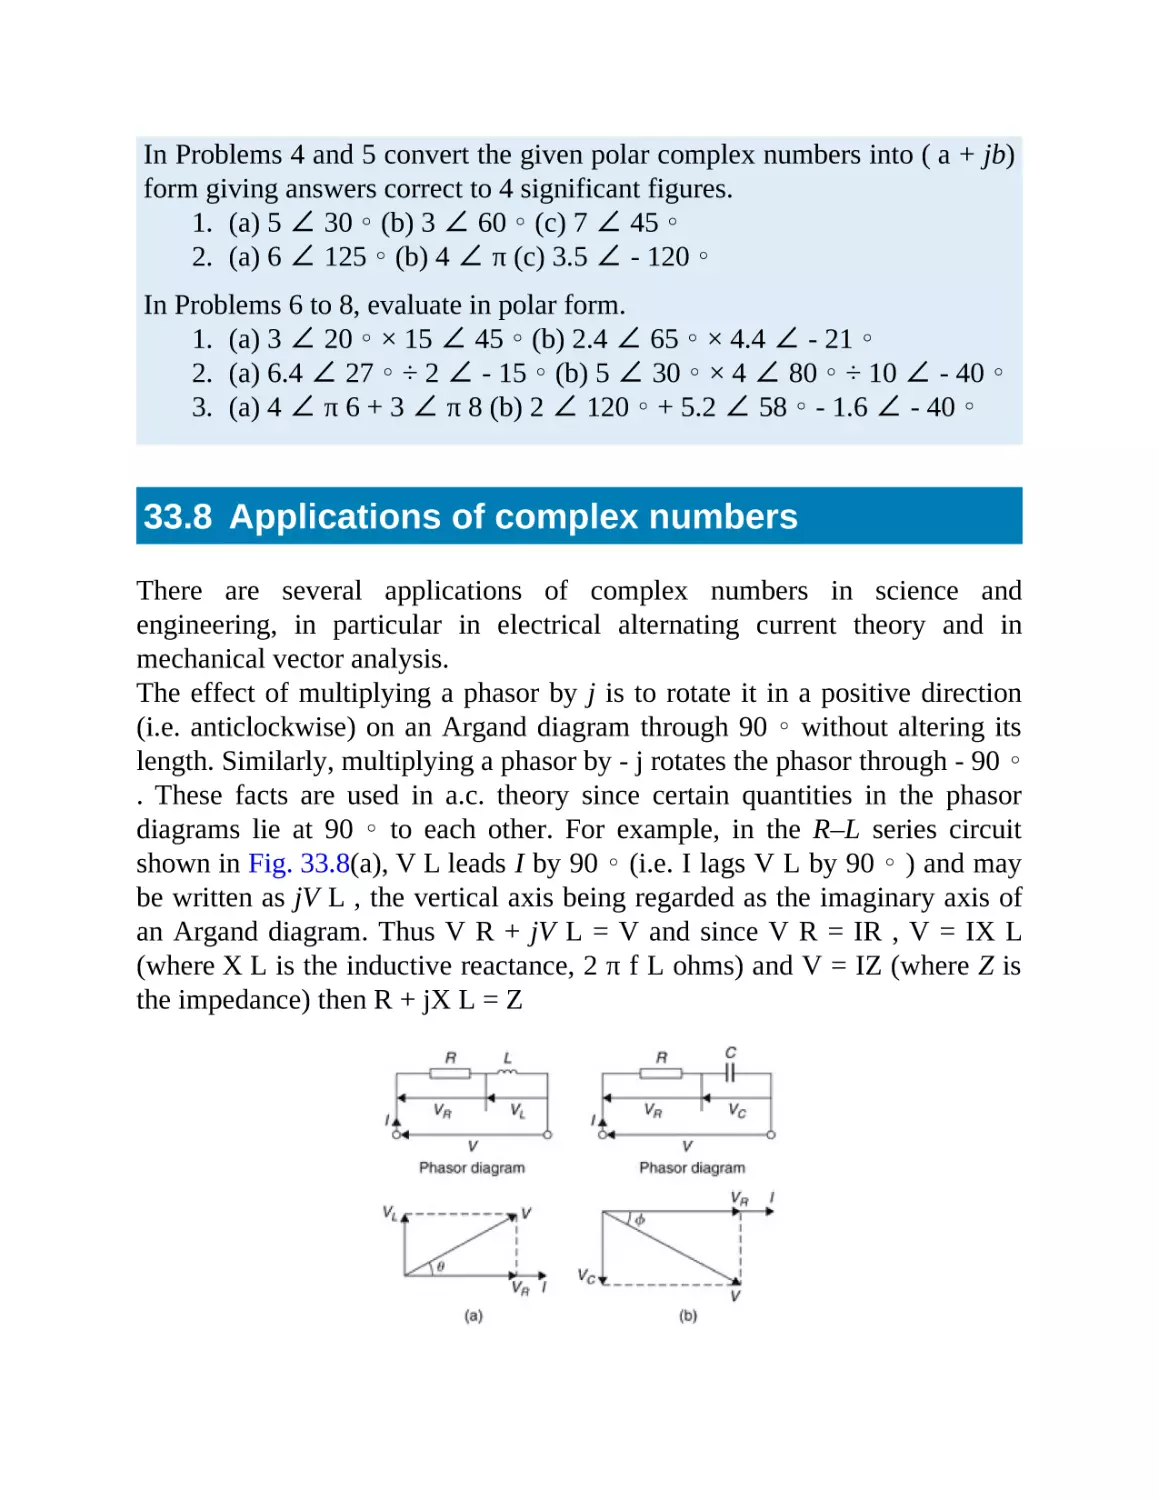 33.8 Applications of complex numbers